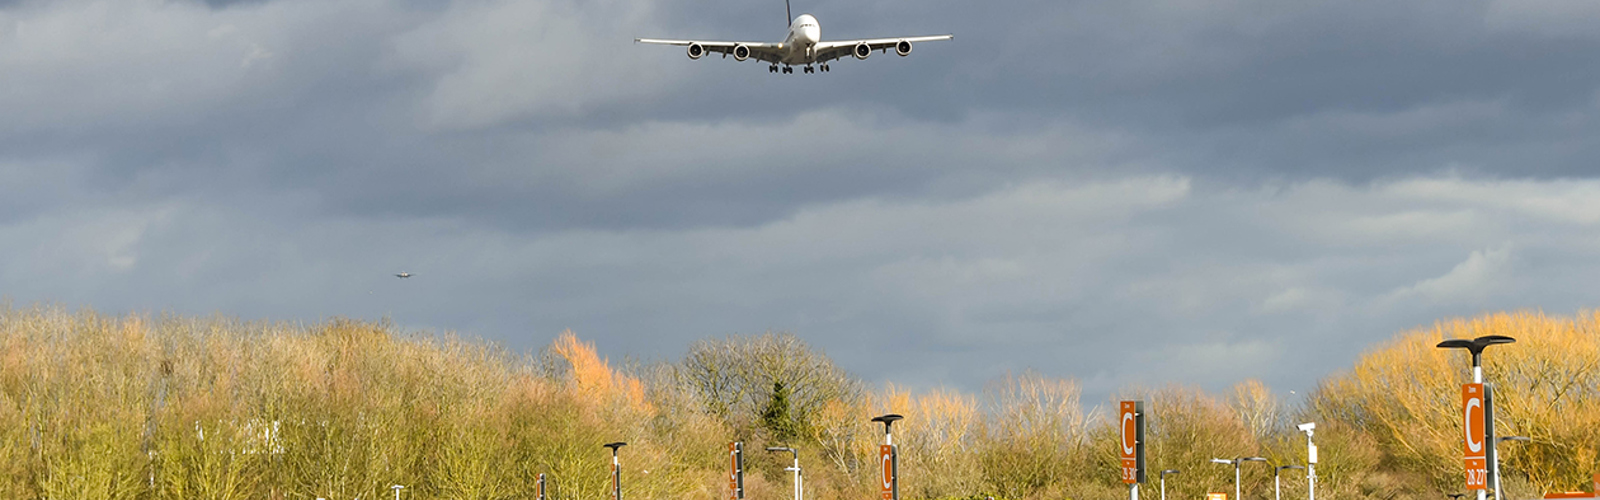 An aeroplane coming in to land at Heathrow airport